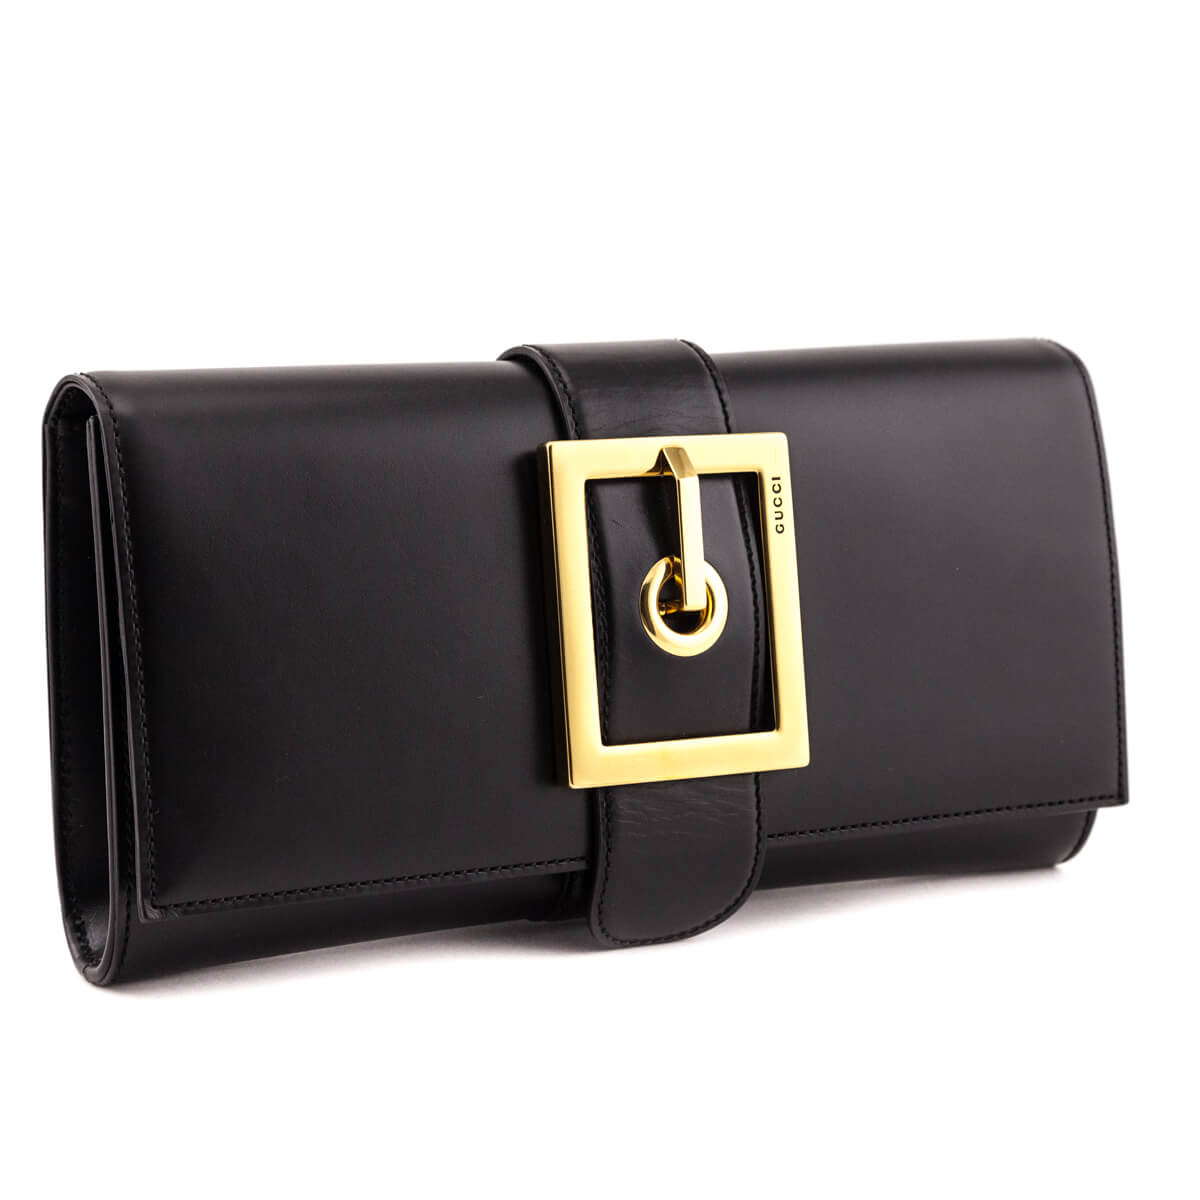 Gucci Black Lady Buckle Clutch - Love that Bag etc - Preowned Authentic Designer Handbags & Preloved Fashions